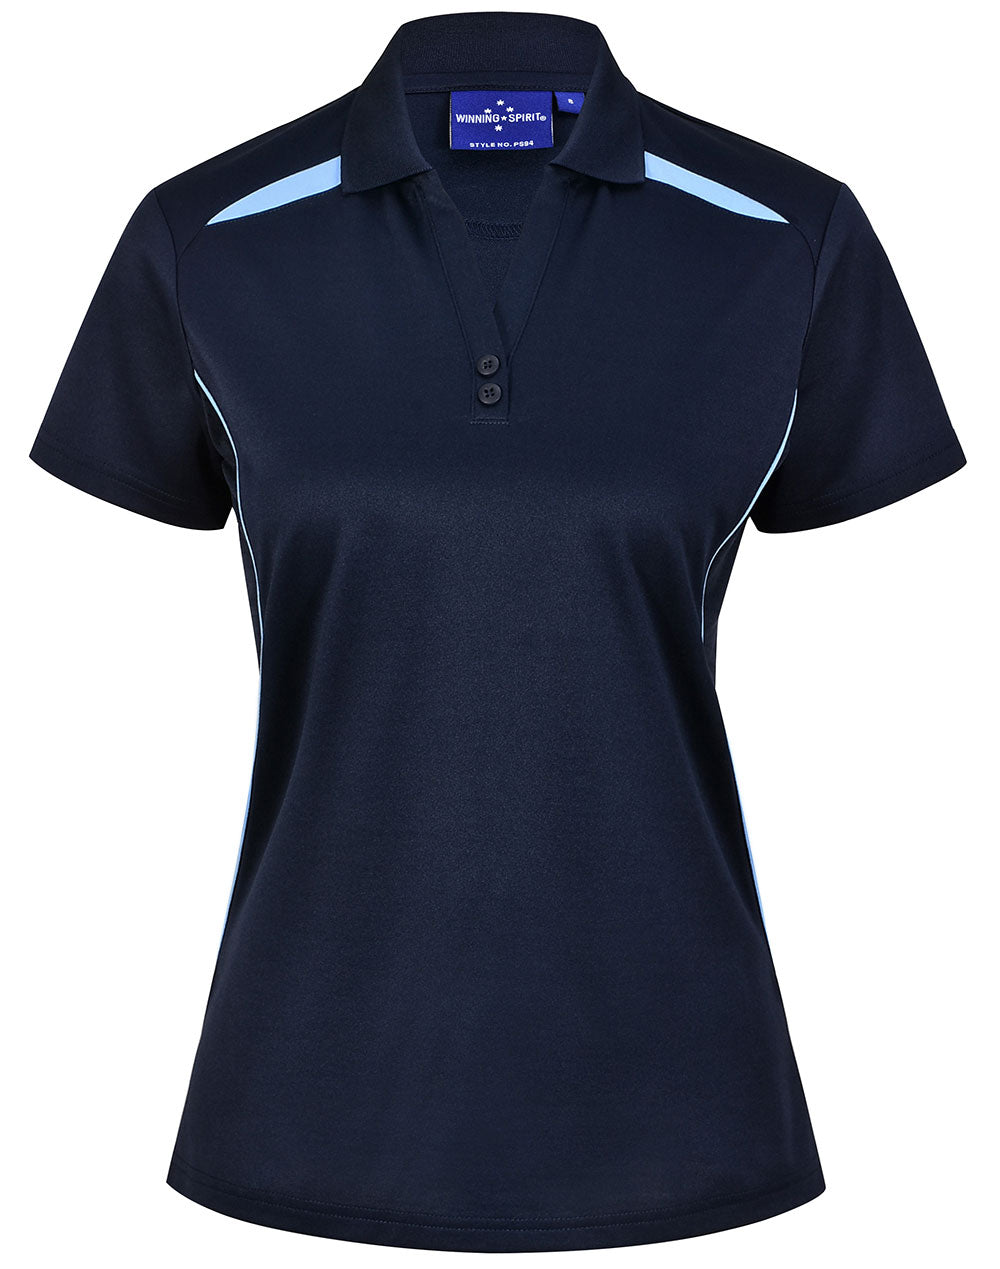 Women's Sustainable Poly/Cotton Contrast Polo Shirt PS94 Casual Wear Winning Spirit Navy/Sky 6 